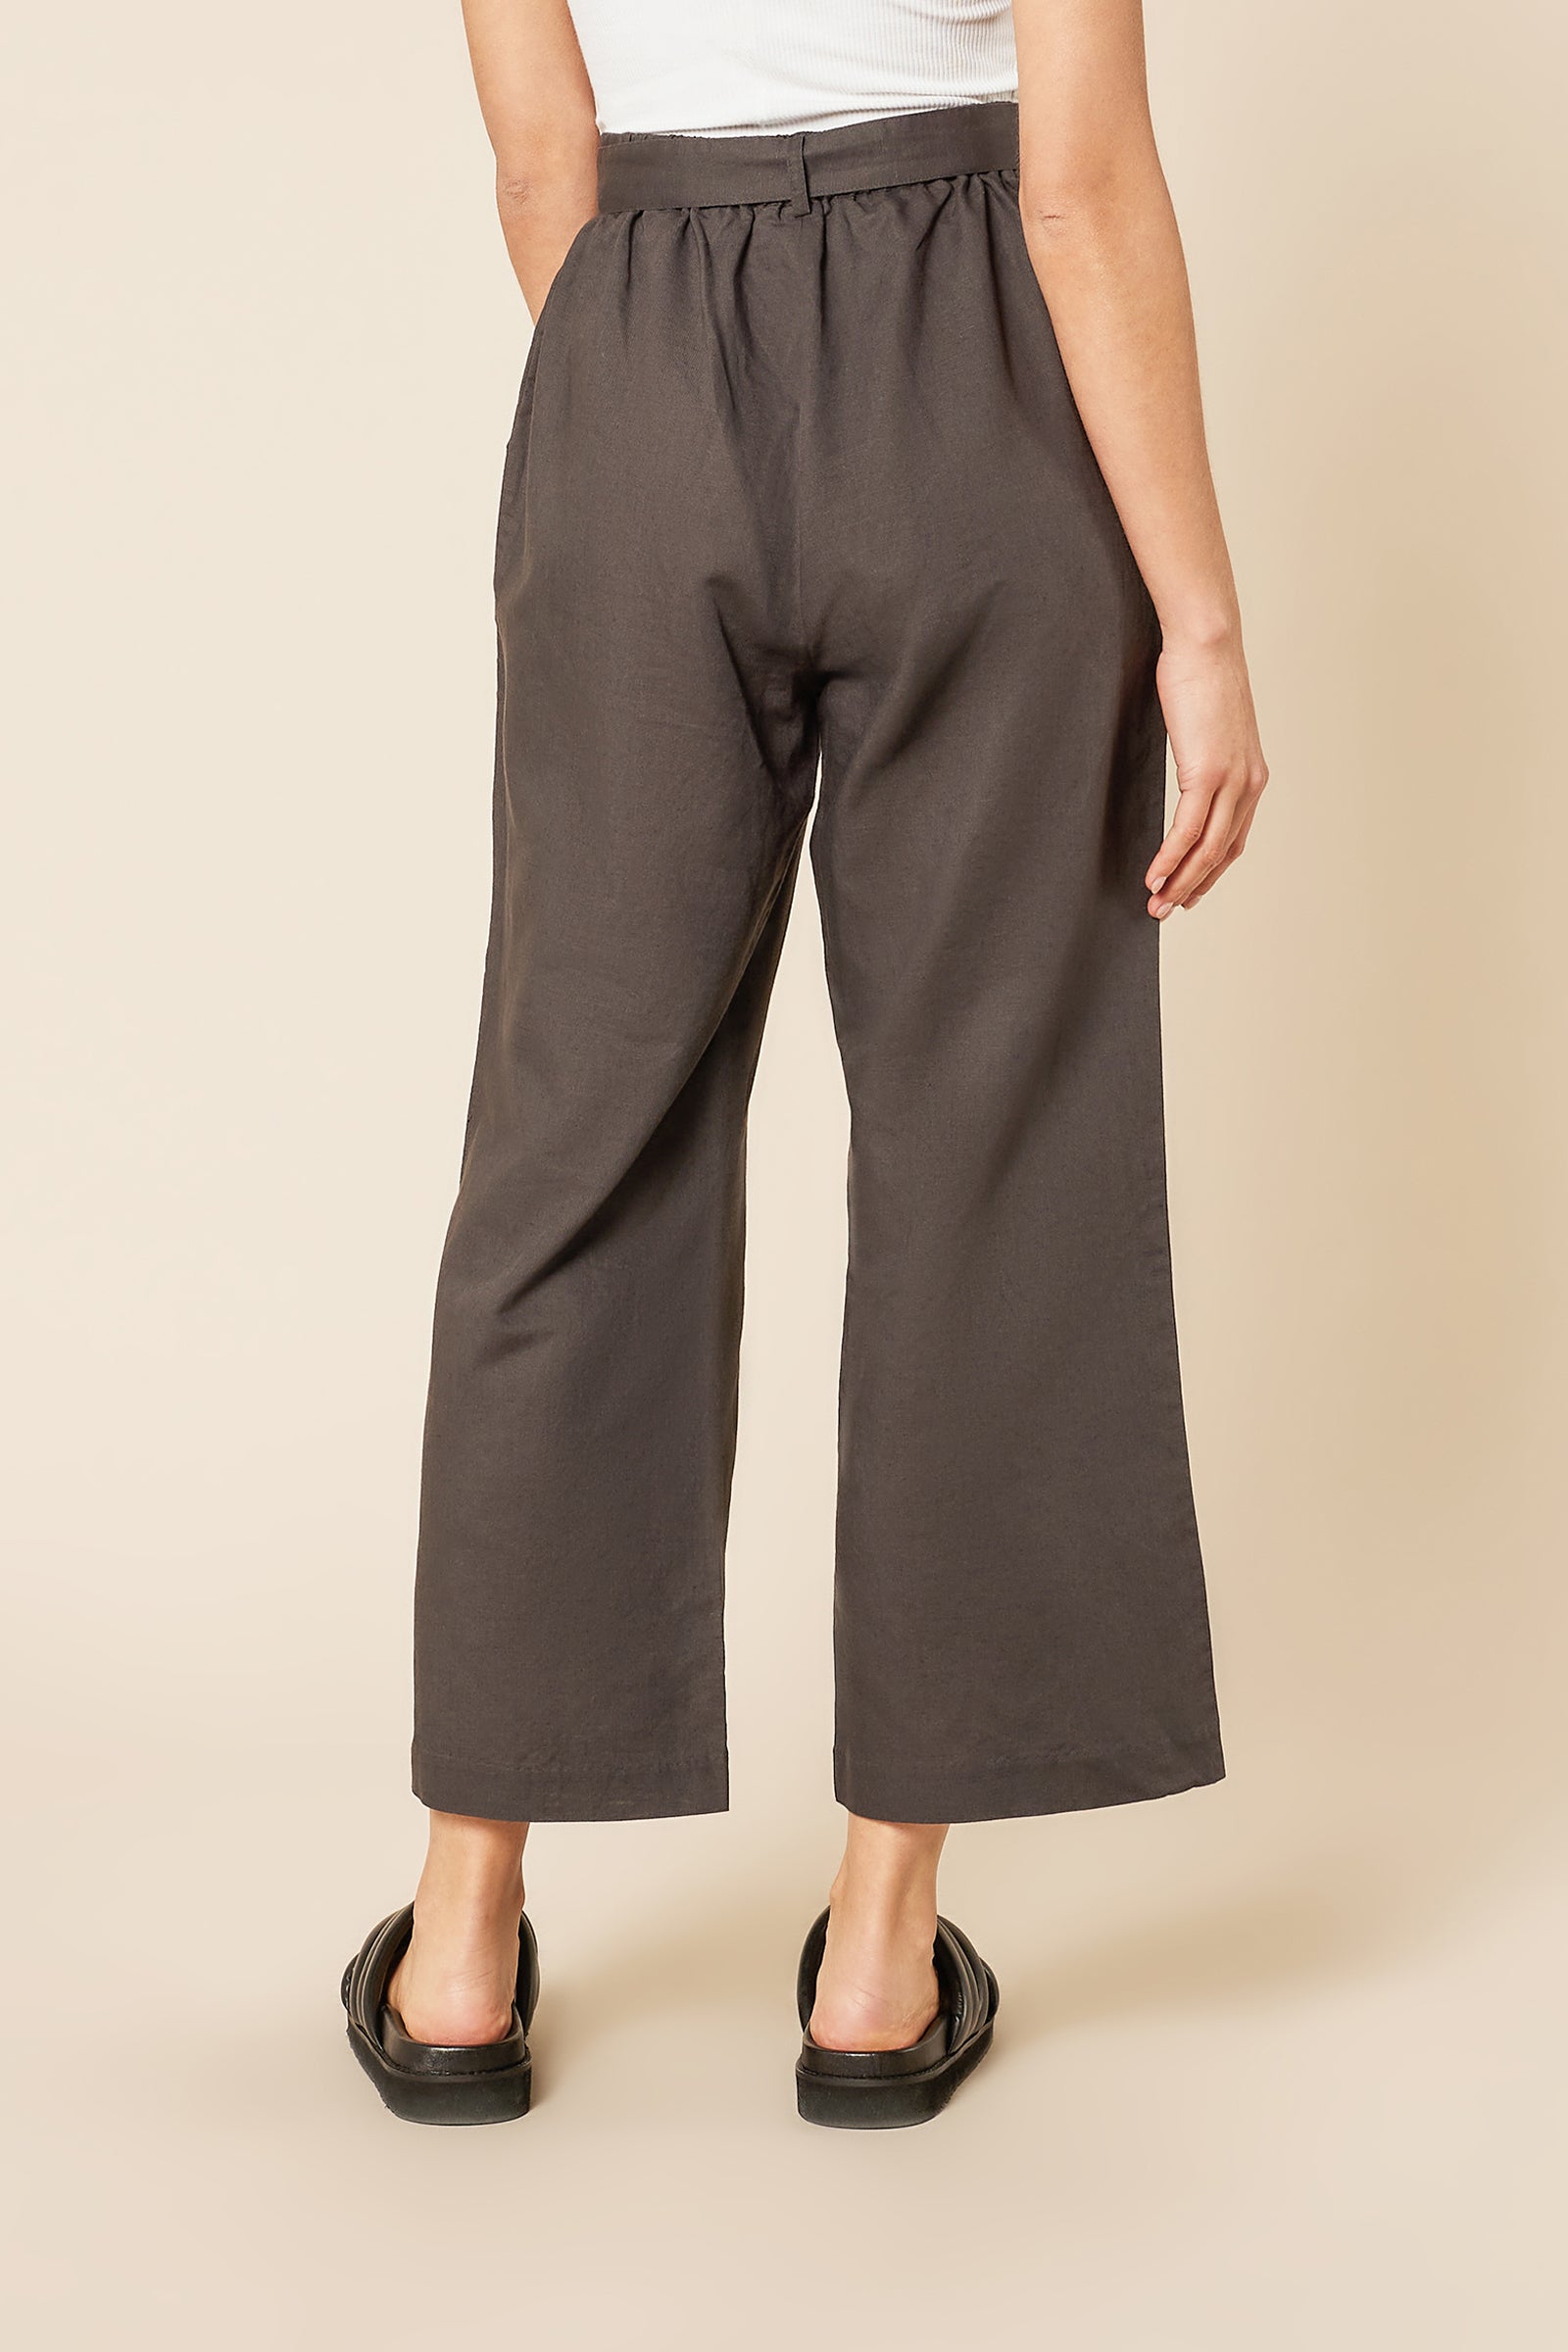 Nude Lucy Brynn Wide Leg Pant in a Dark Grey In a Brown Coal Colour